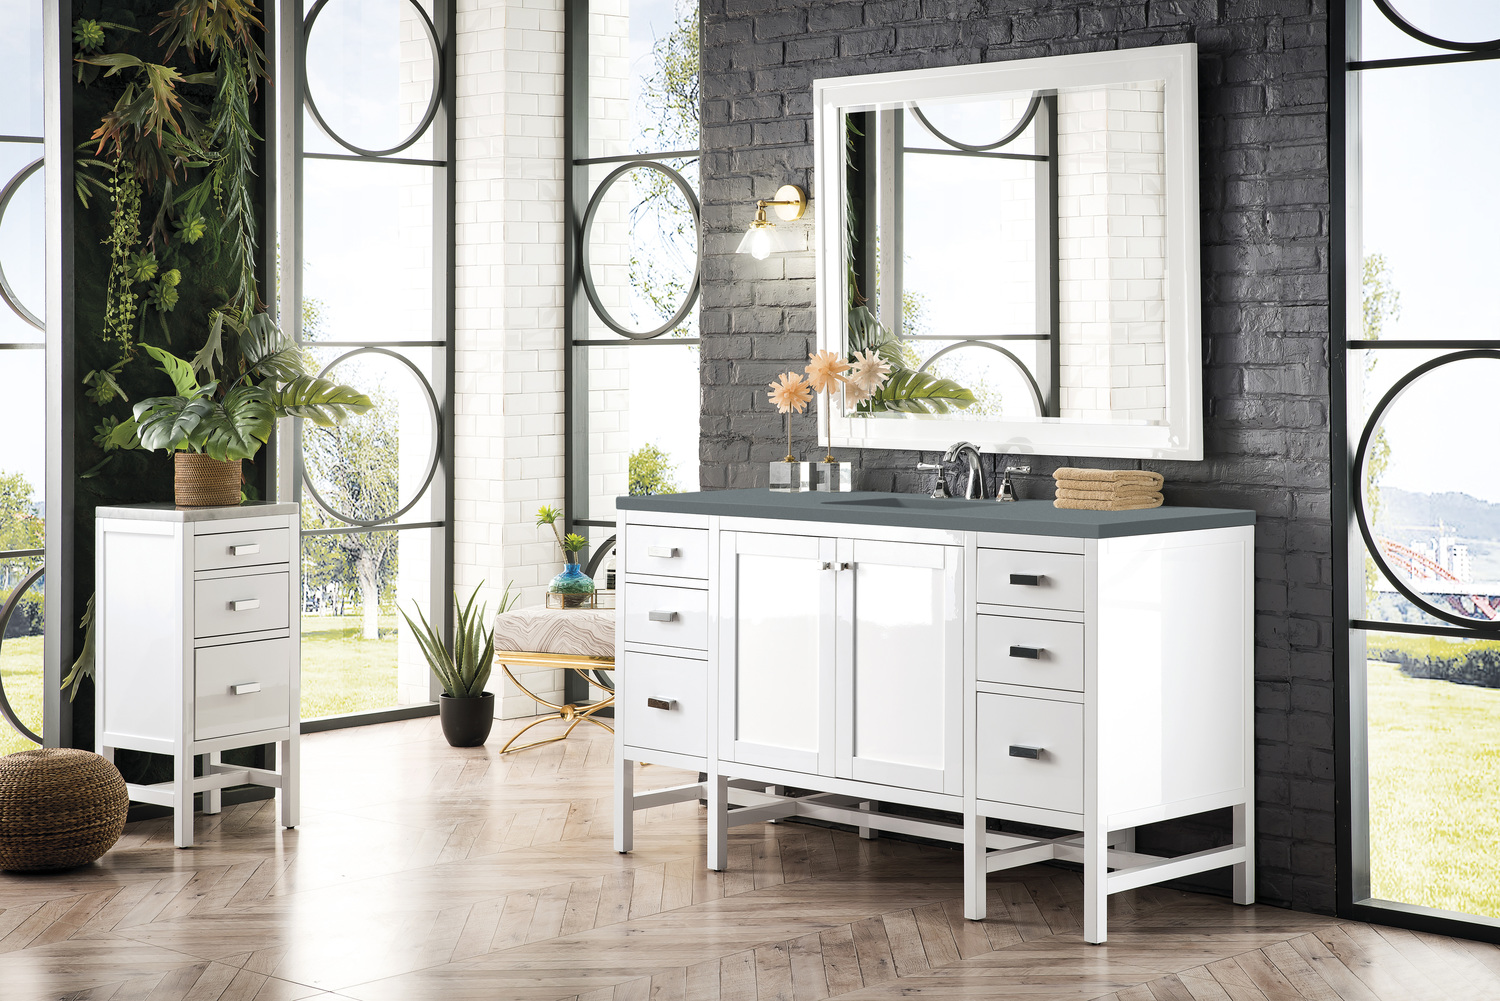 vanity and storage cabinet set James Martin Vanity Glossy White Traditional, Transitional